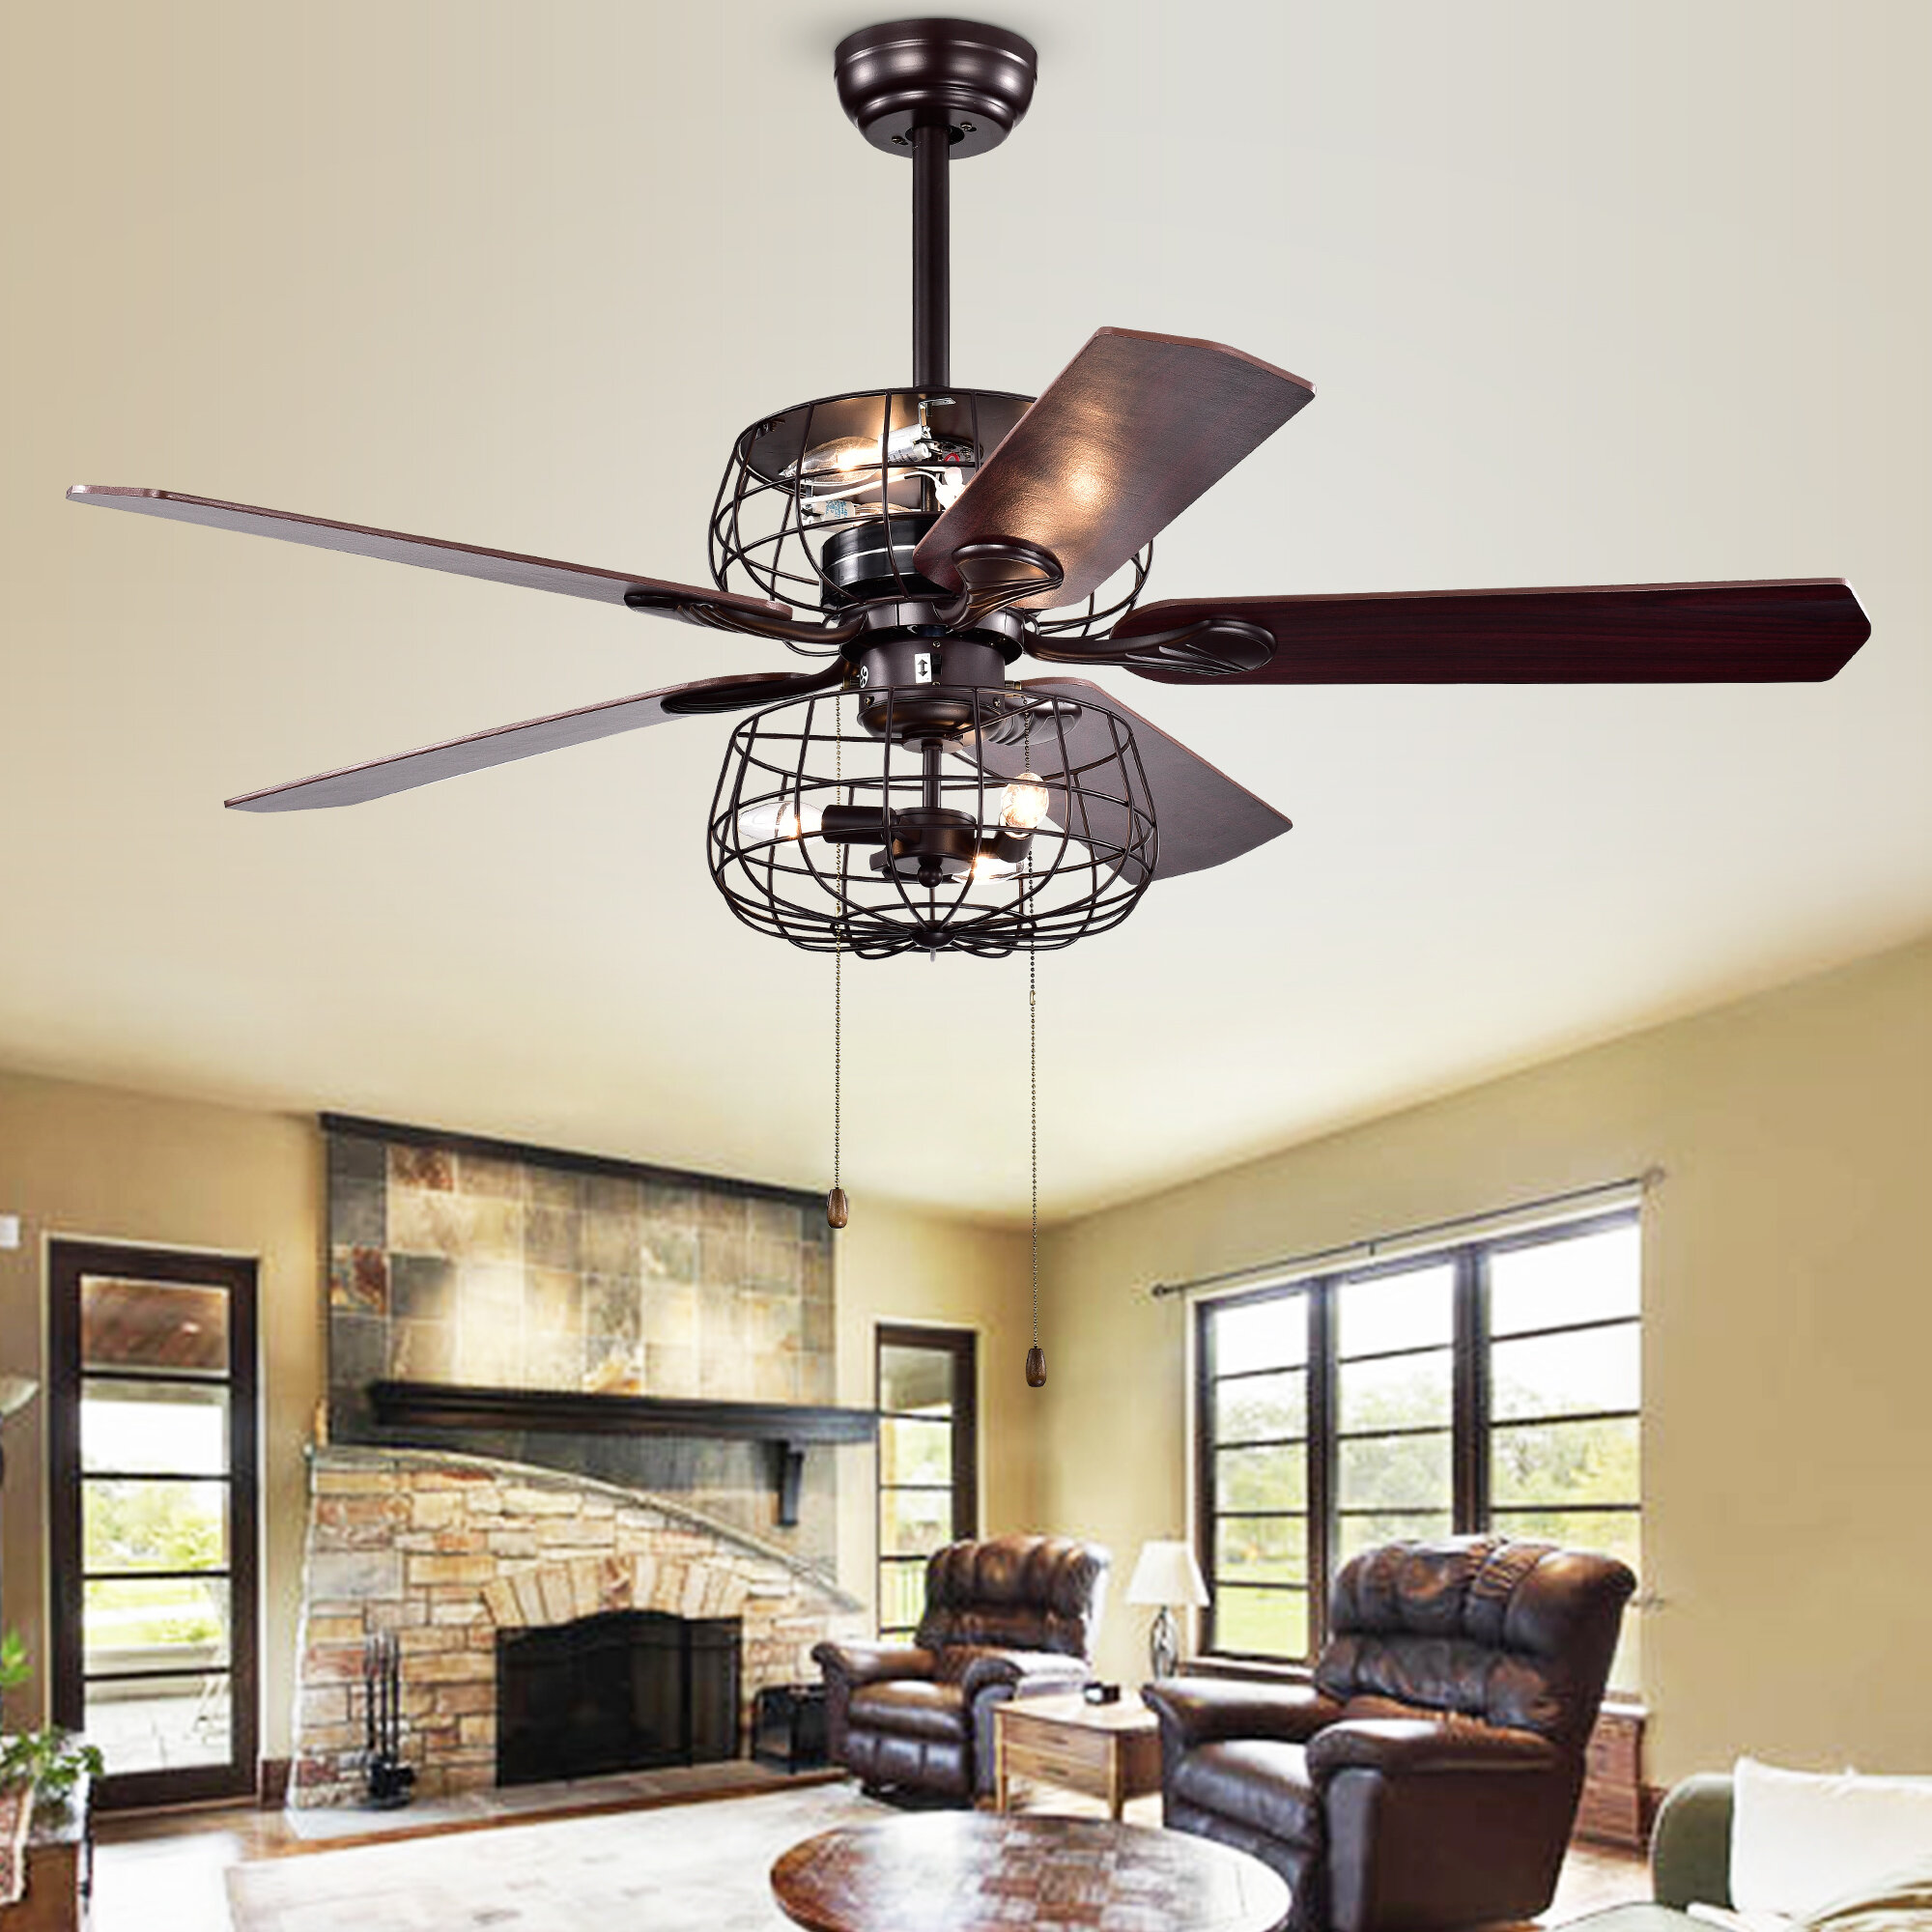 17 Stories 52 Kaiya 5 Blade Caged Ceiling Fan With Pull Chain And Light Kit Included Reviews Wayfair